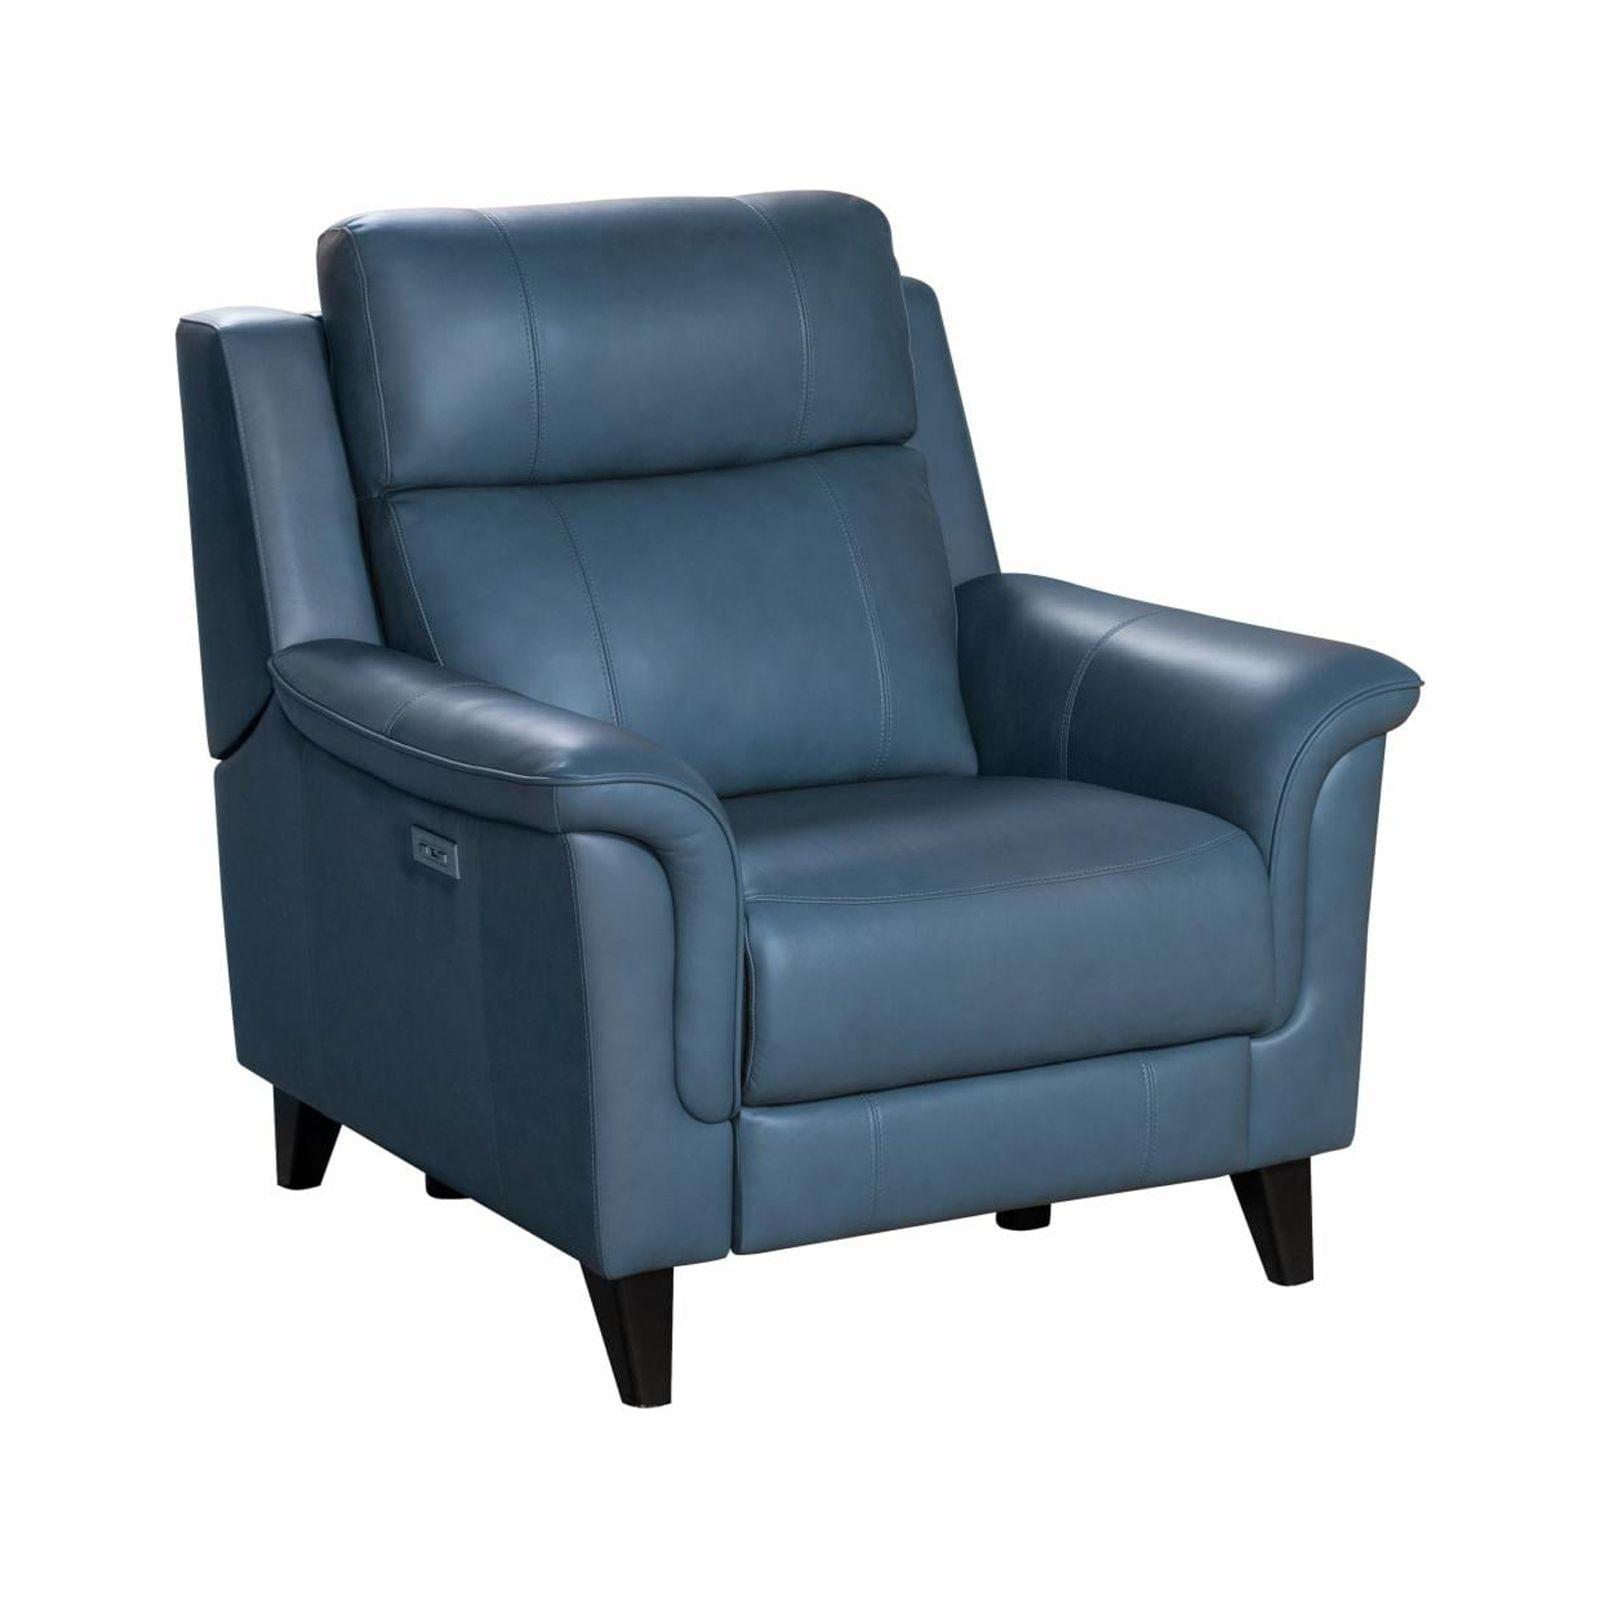 Masen Bluegray Leather Contemporary Power Recliner 39.40"